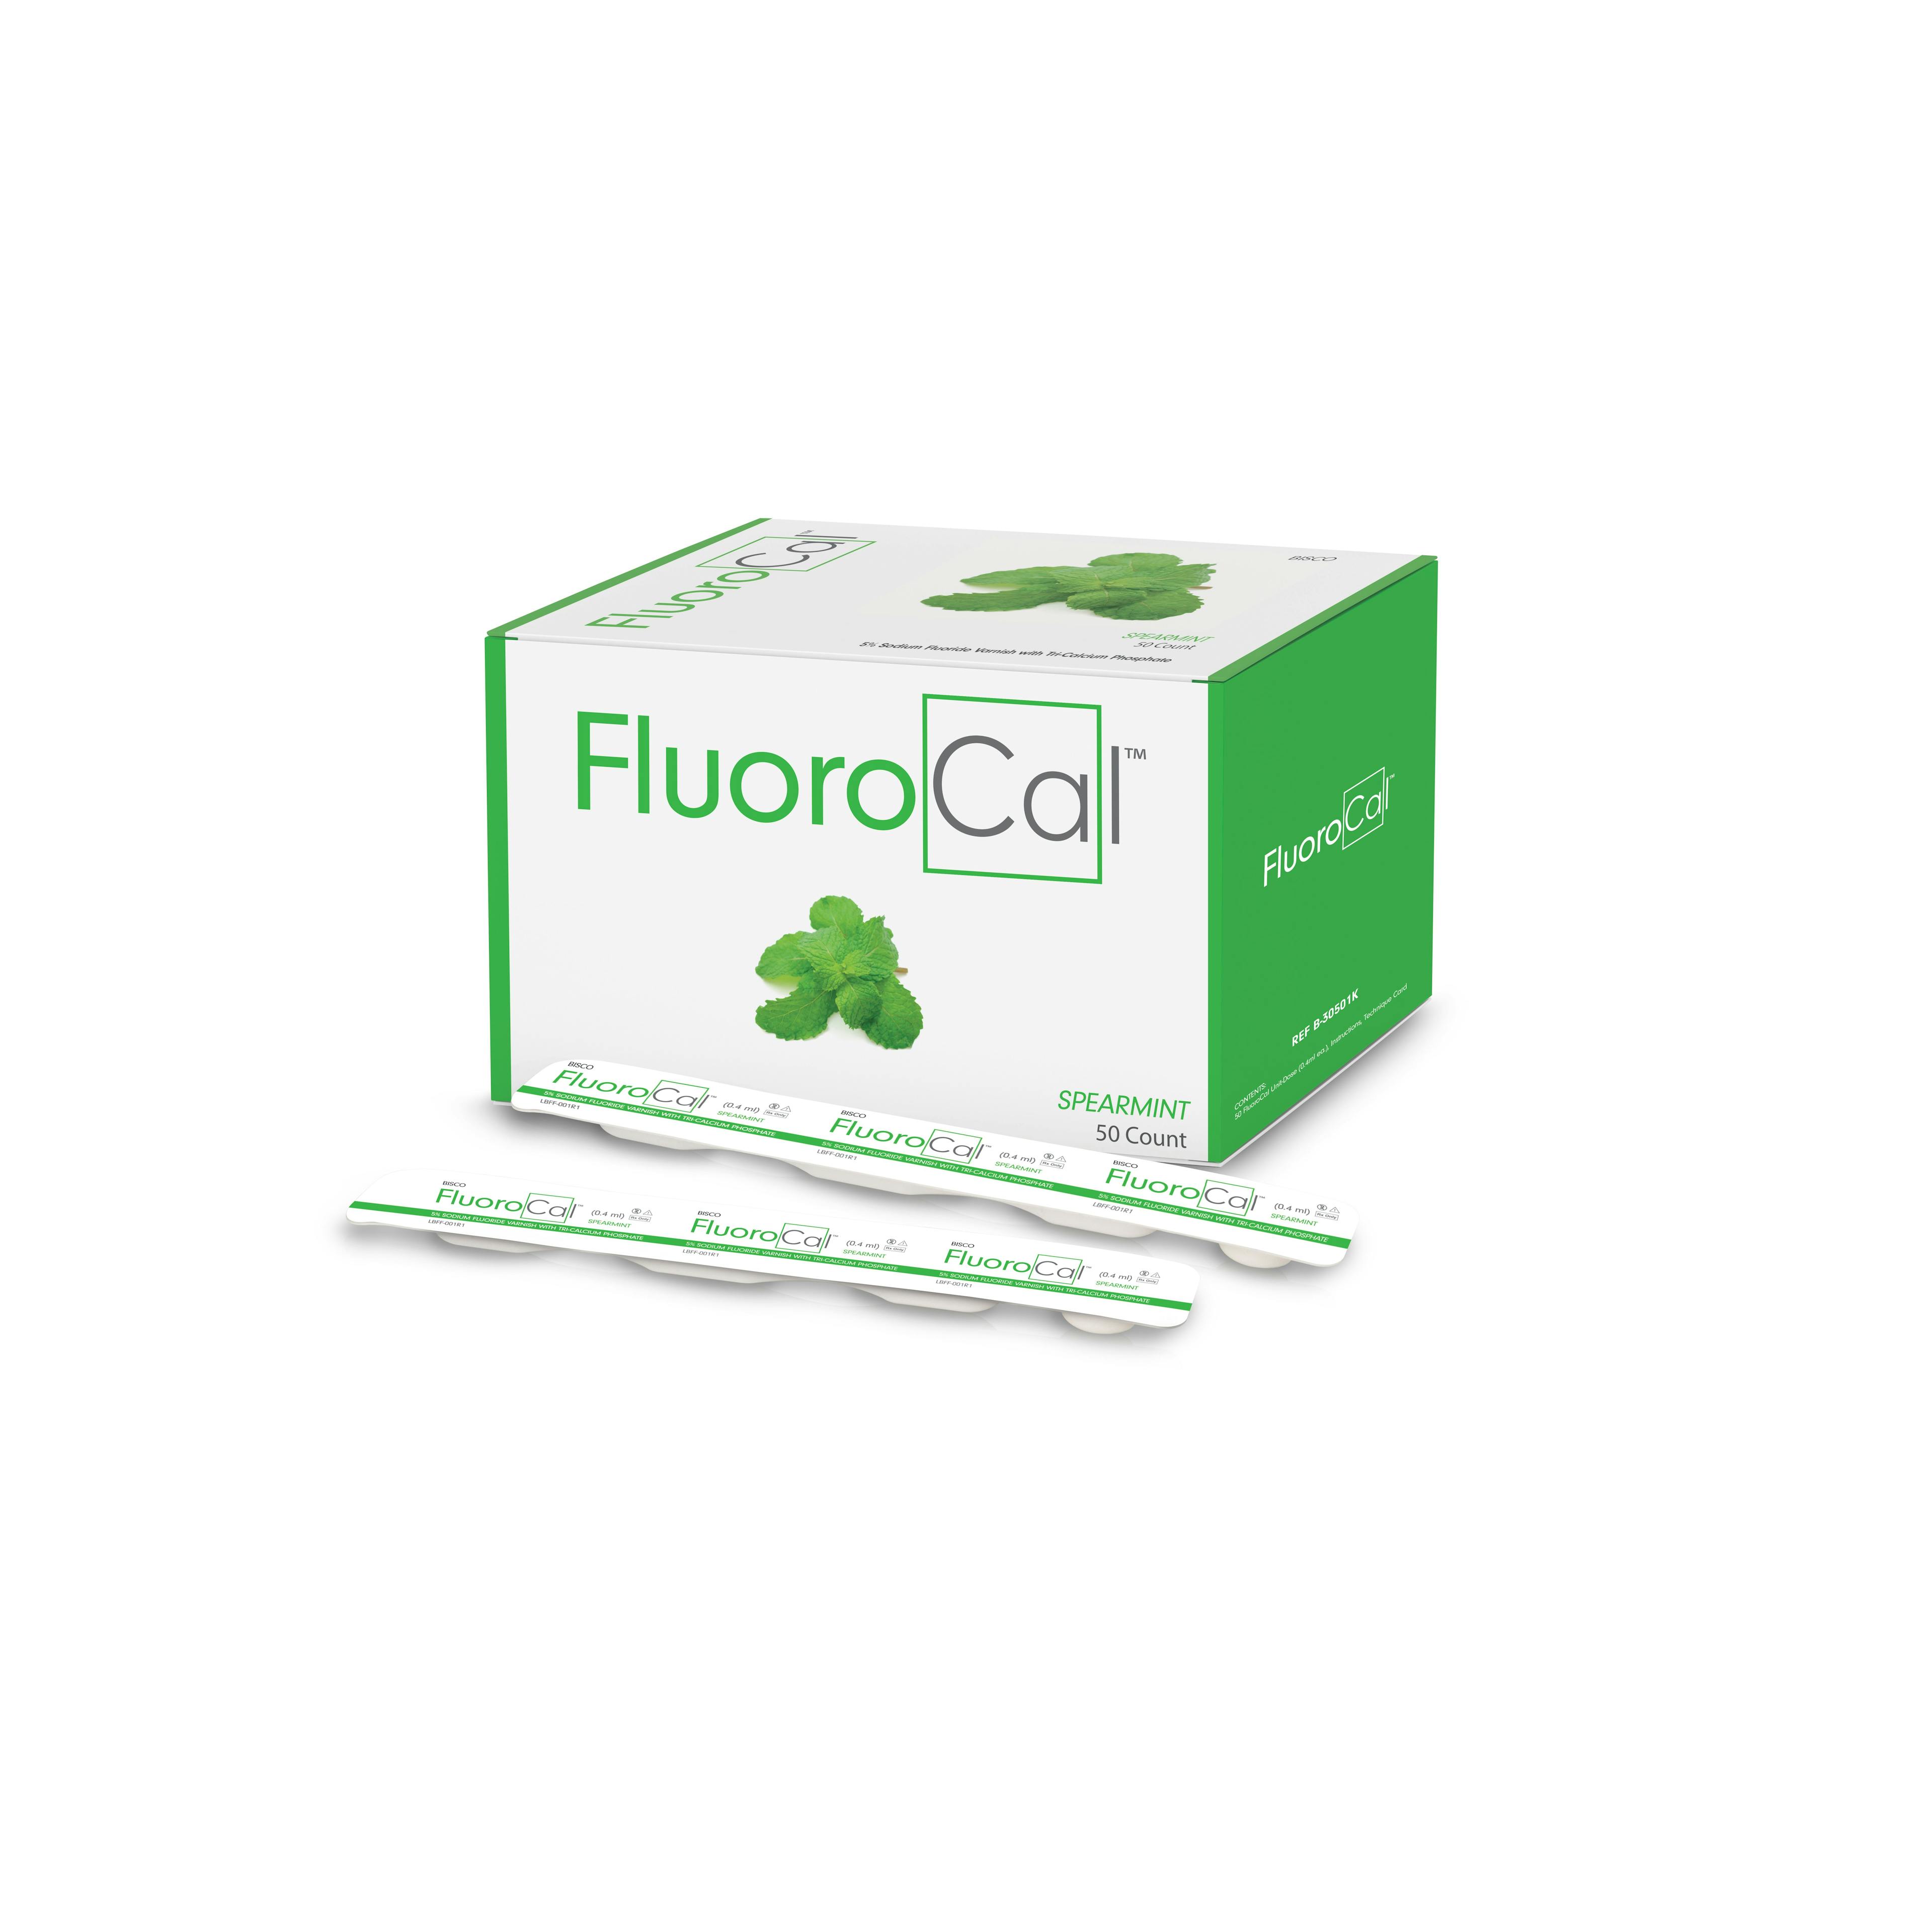 BISCO’s New Fluoride Varnish Delivers Targeted, Sustained Release of Calcium and Fluoride